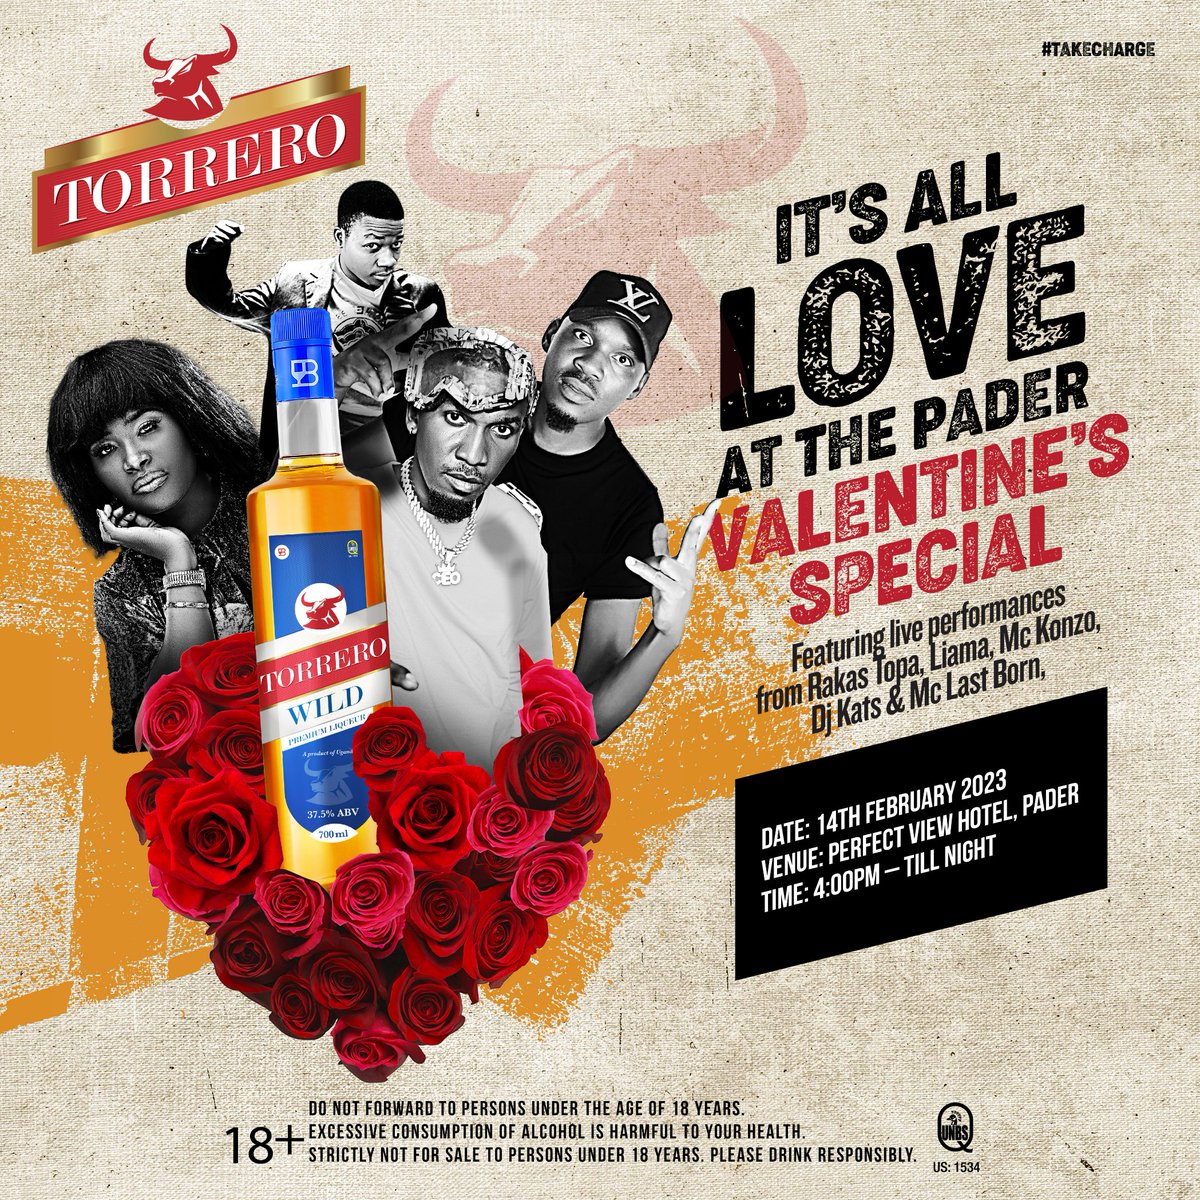 Treat that special someone to a romantic Valentine's evening full of music and love with the #ValentinesSpecial at @perfectViewHotel sponsored by Torrero! #TakeCharge